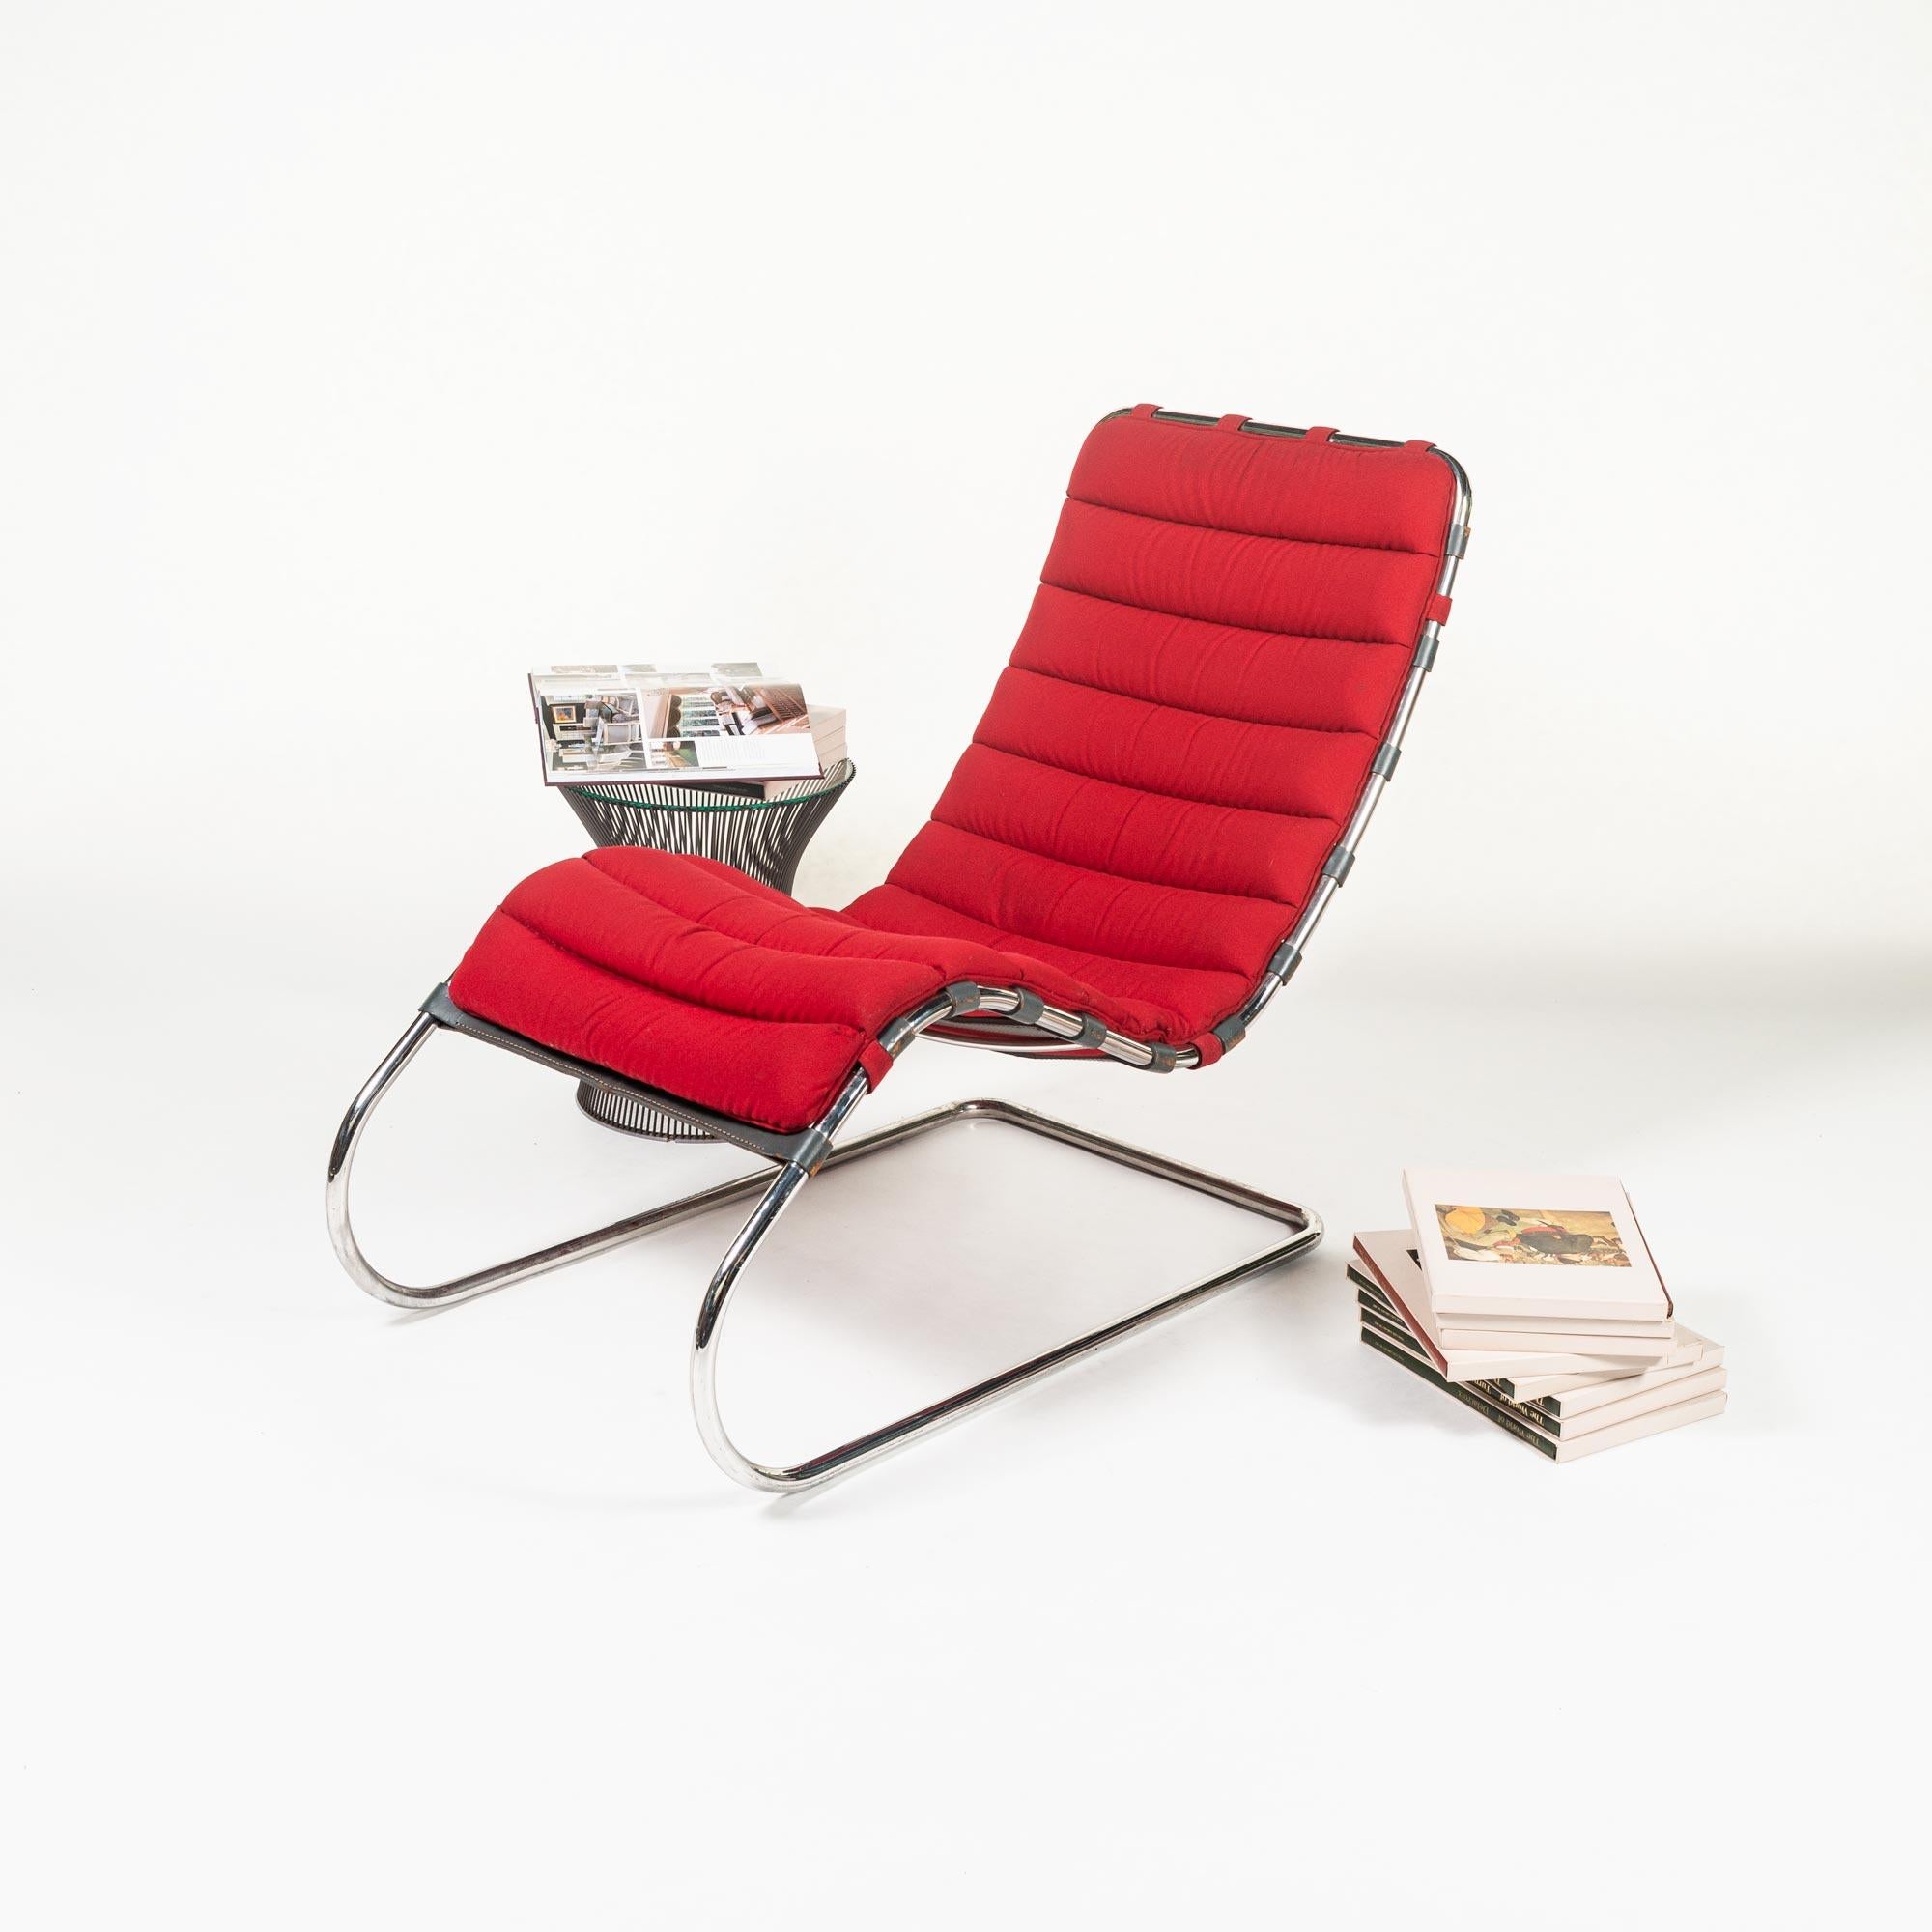 Steel MR Chaise Lounge Chair by Mies van der Rohe for Knoll